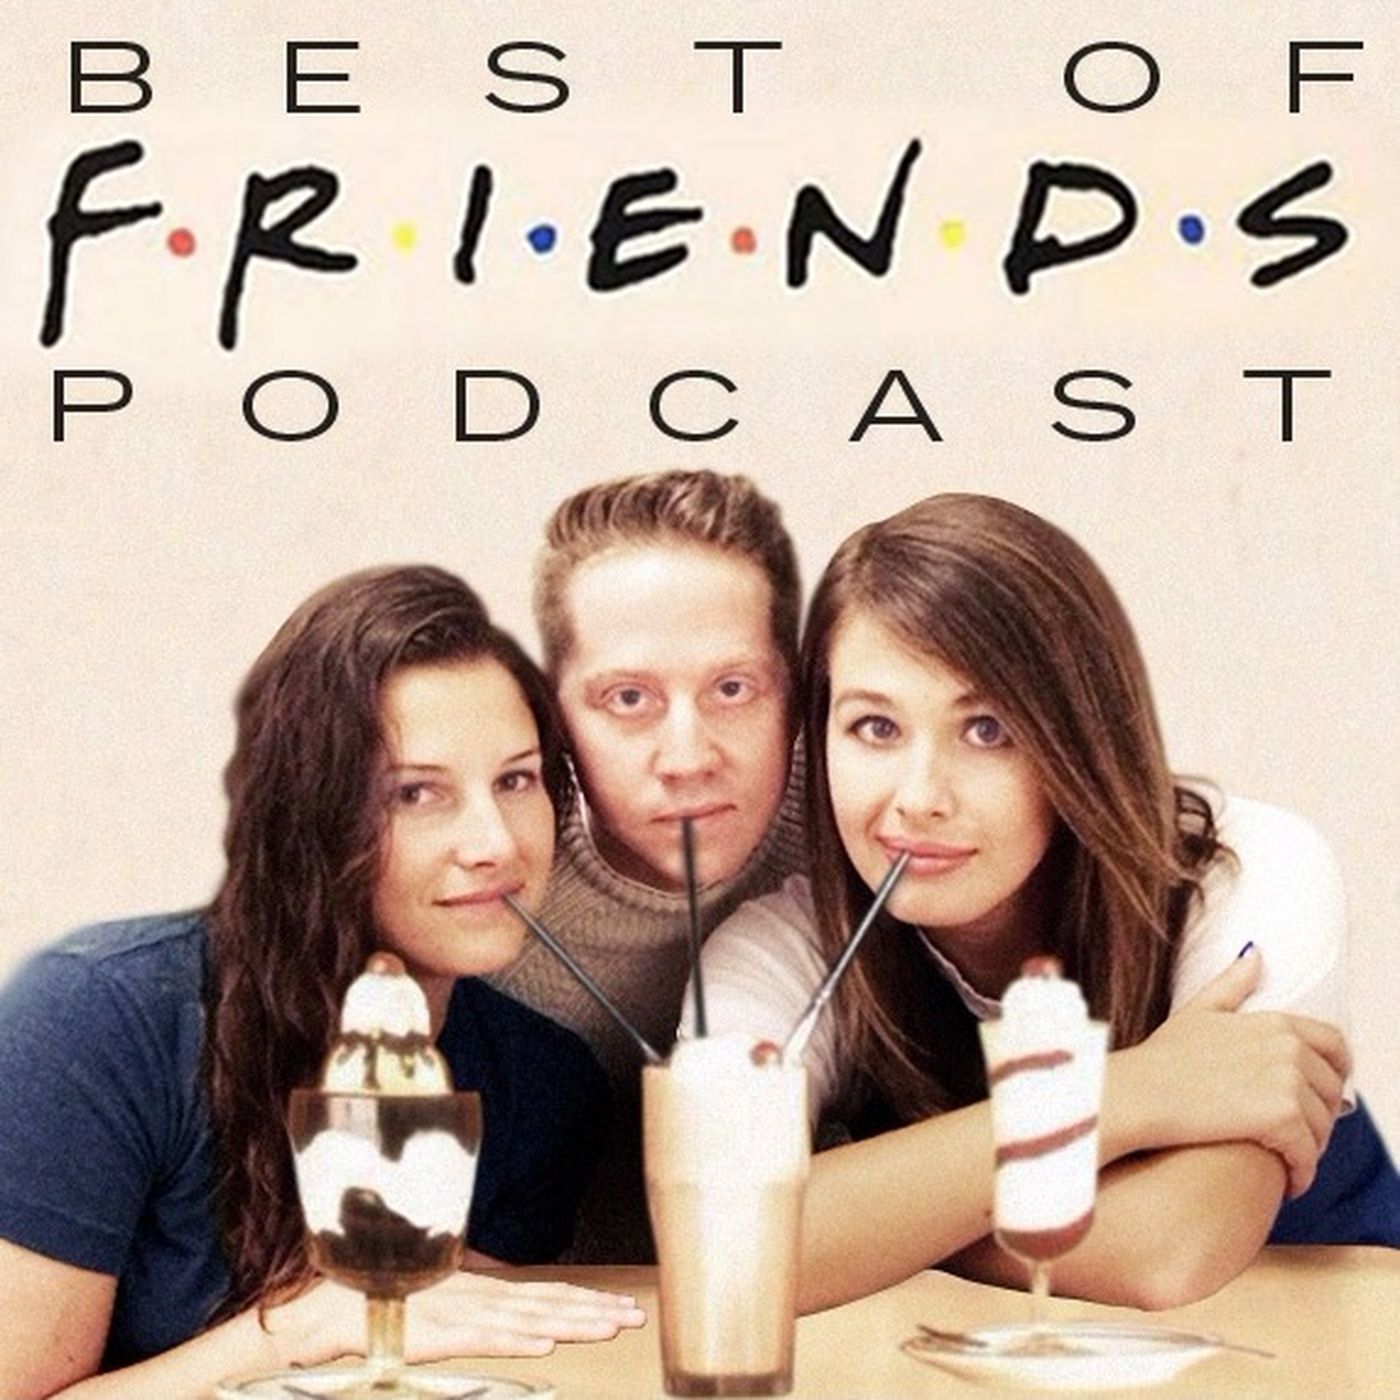 Episode 46: The One With The Lady Parts